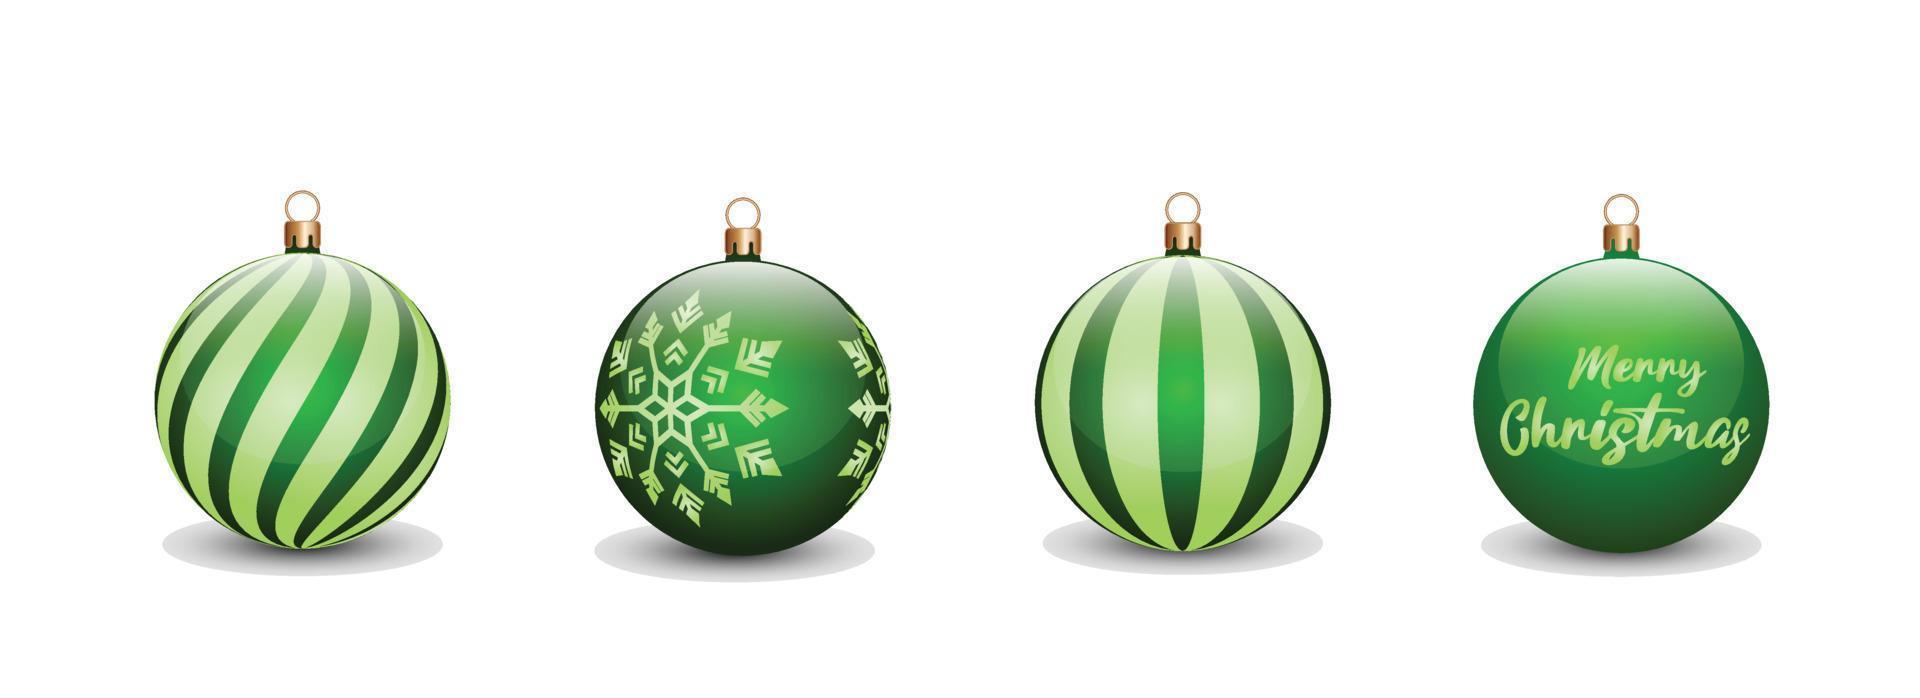 Set of christmas balls concept in Green color for christmas day celebration. can be used for design assets, invitations, posters, banners, billboards with a Christmas concept vector